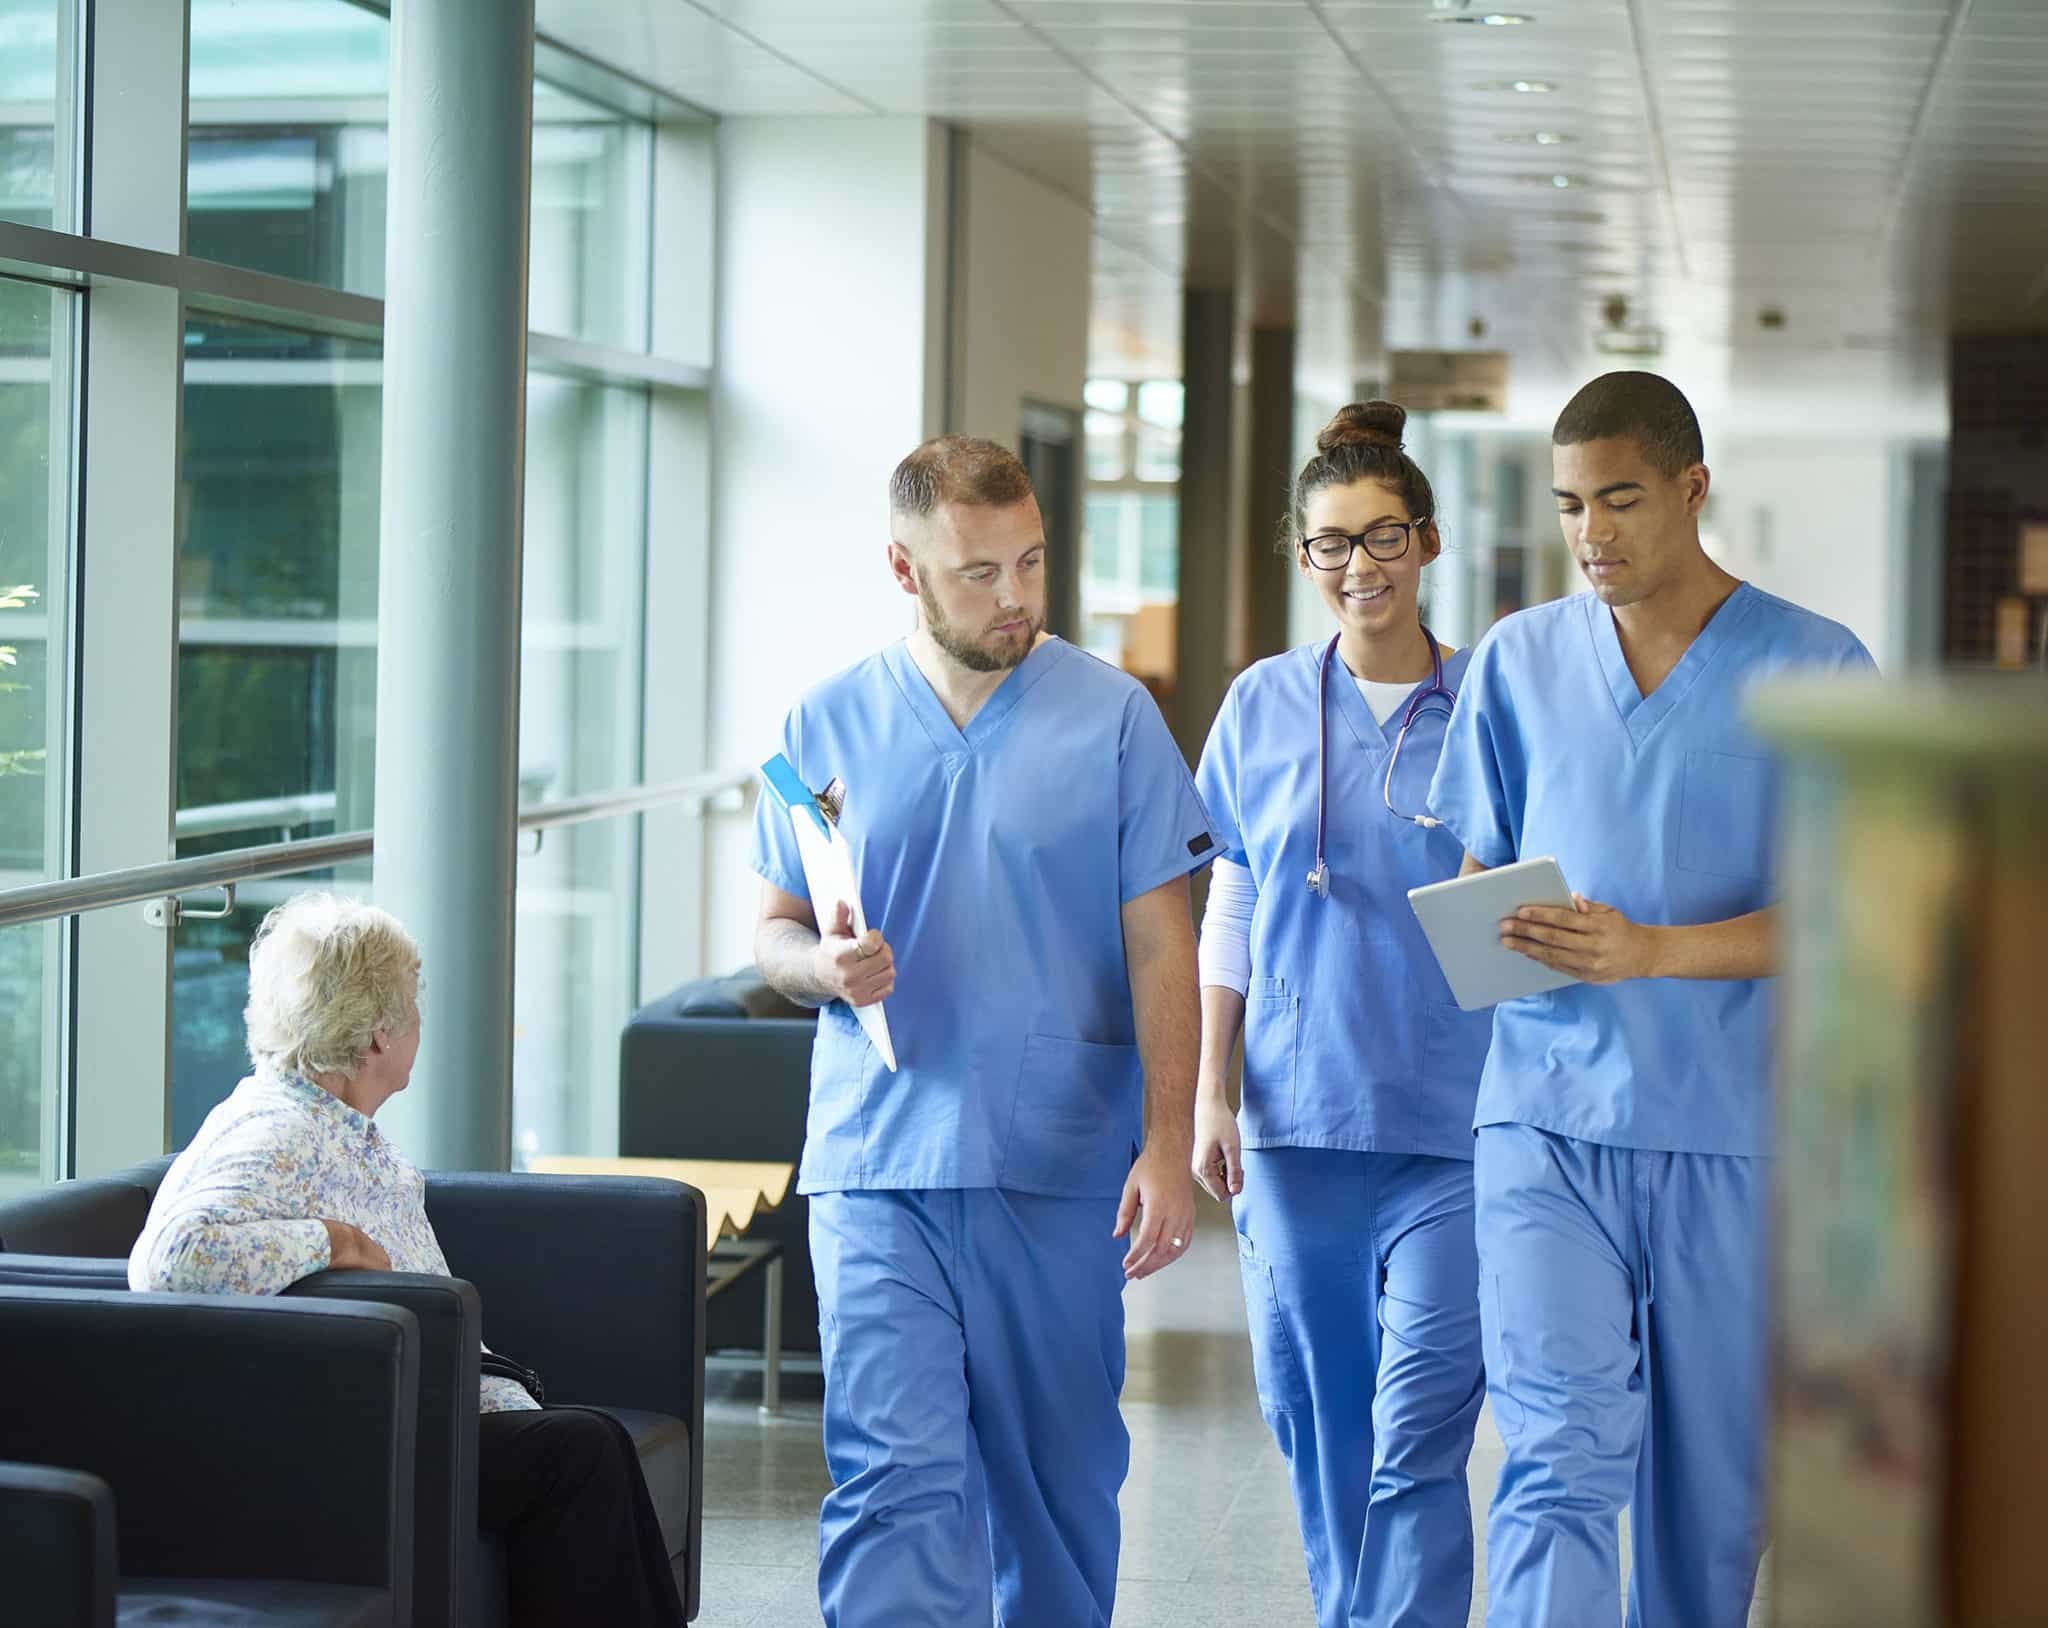 three junior doctors walking along a hospital corridor discussing case and wearing scrubs. A patient or visitor is sitting in the corridor as they walk past .